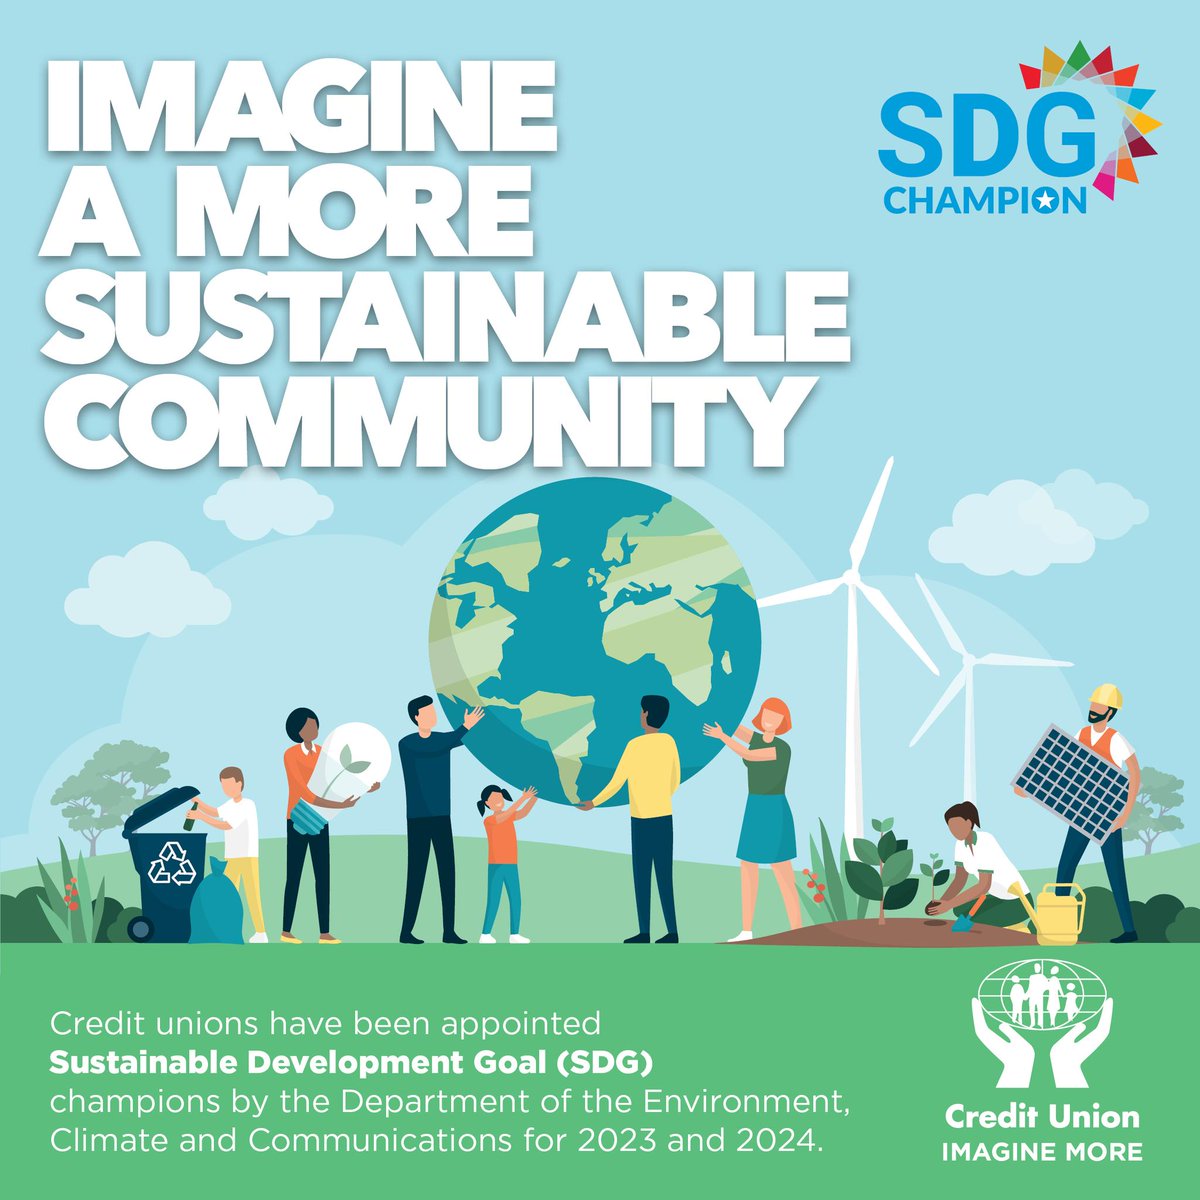 Exciting news! Credit unions in Ireland have been appointed Sustainable Development Goal Champions by the @Dept_ECC, for 2023-2024. We're proud to be part of the movement towards a sustainable future!
#BantryCU #SDGsIRL #Sustainability #CreditUnions